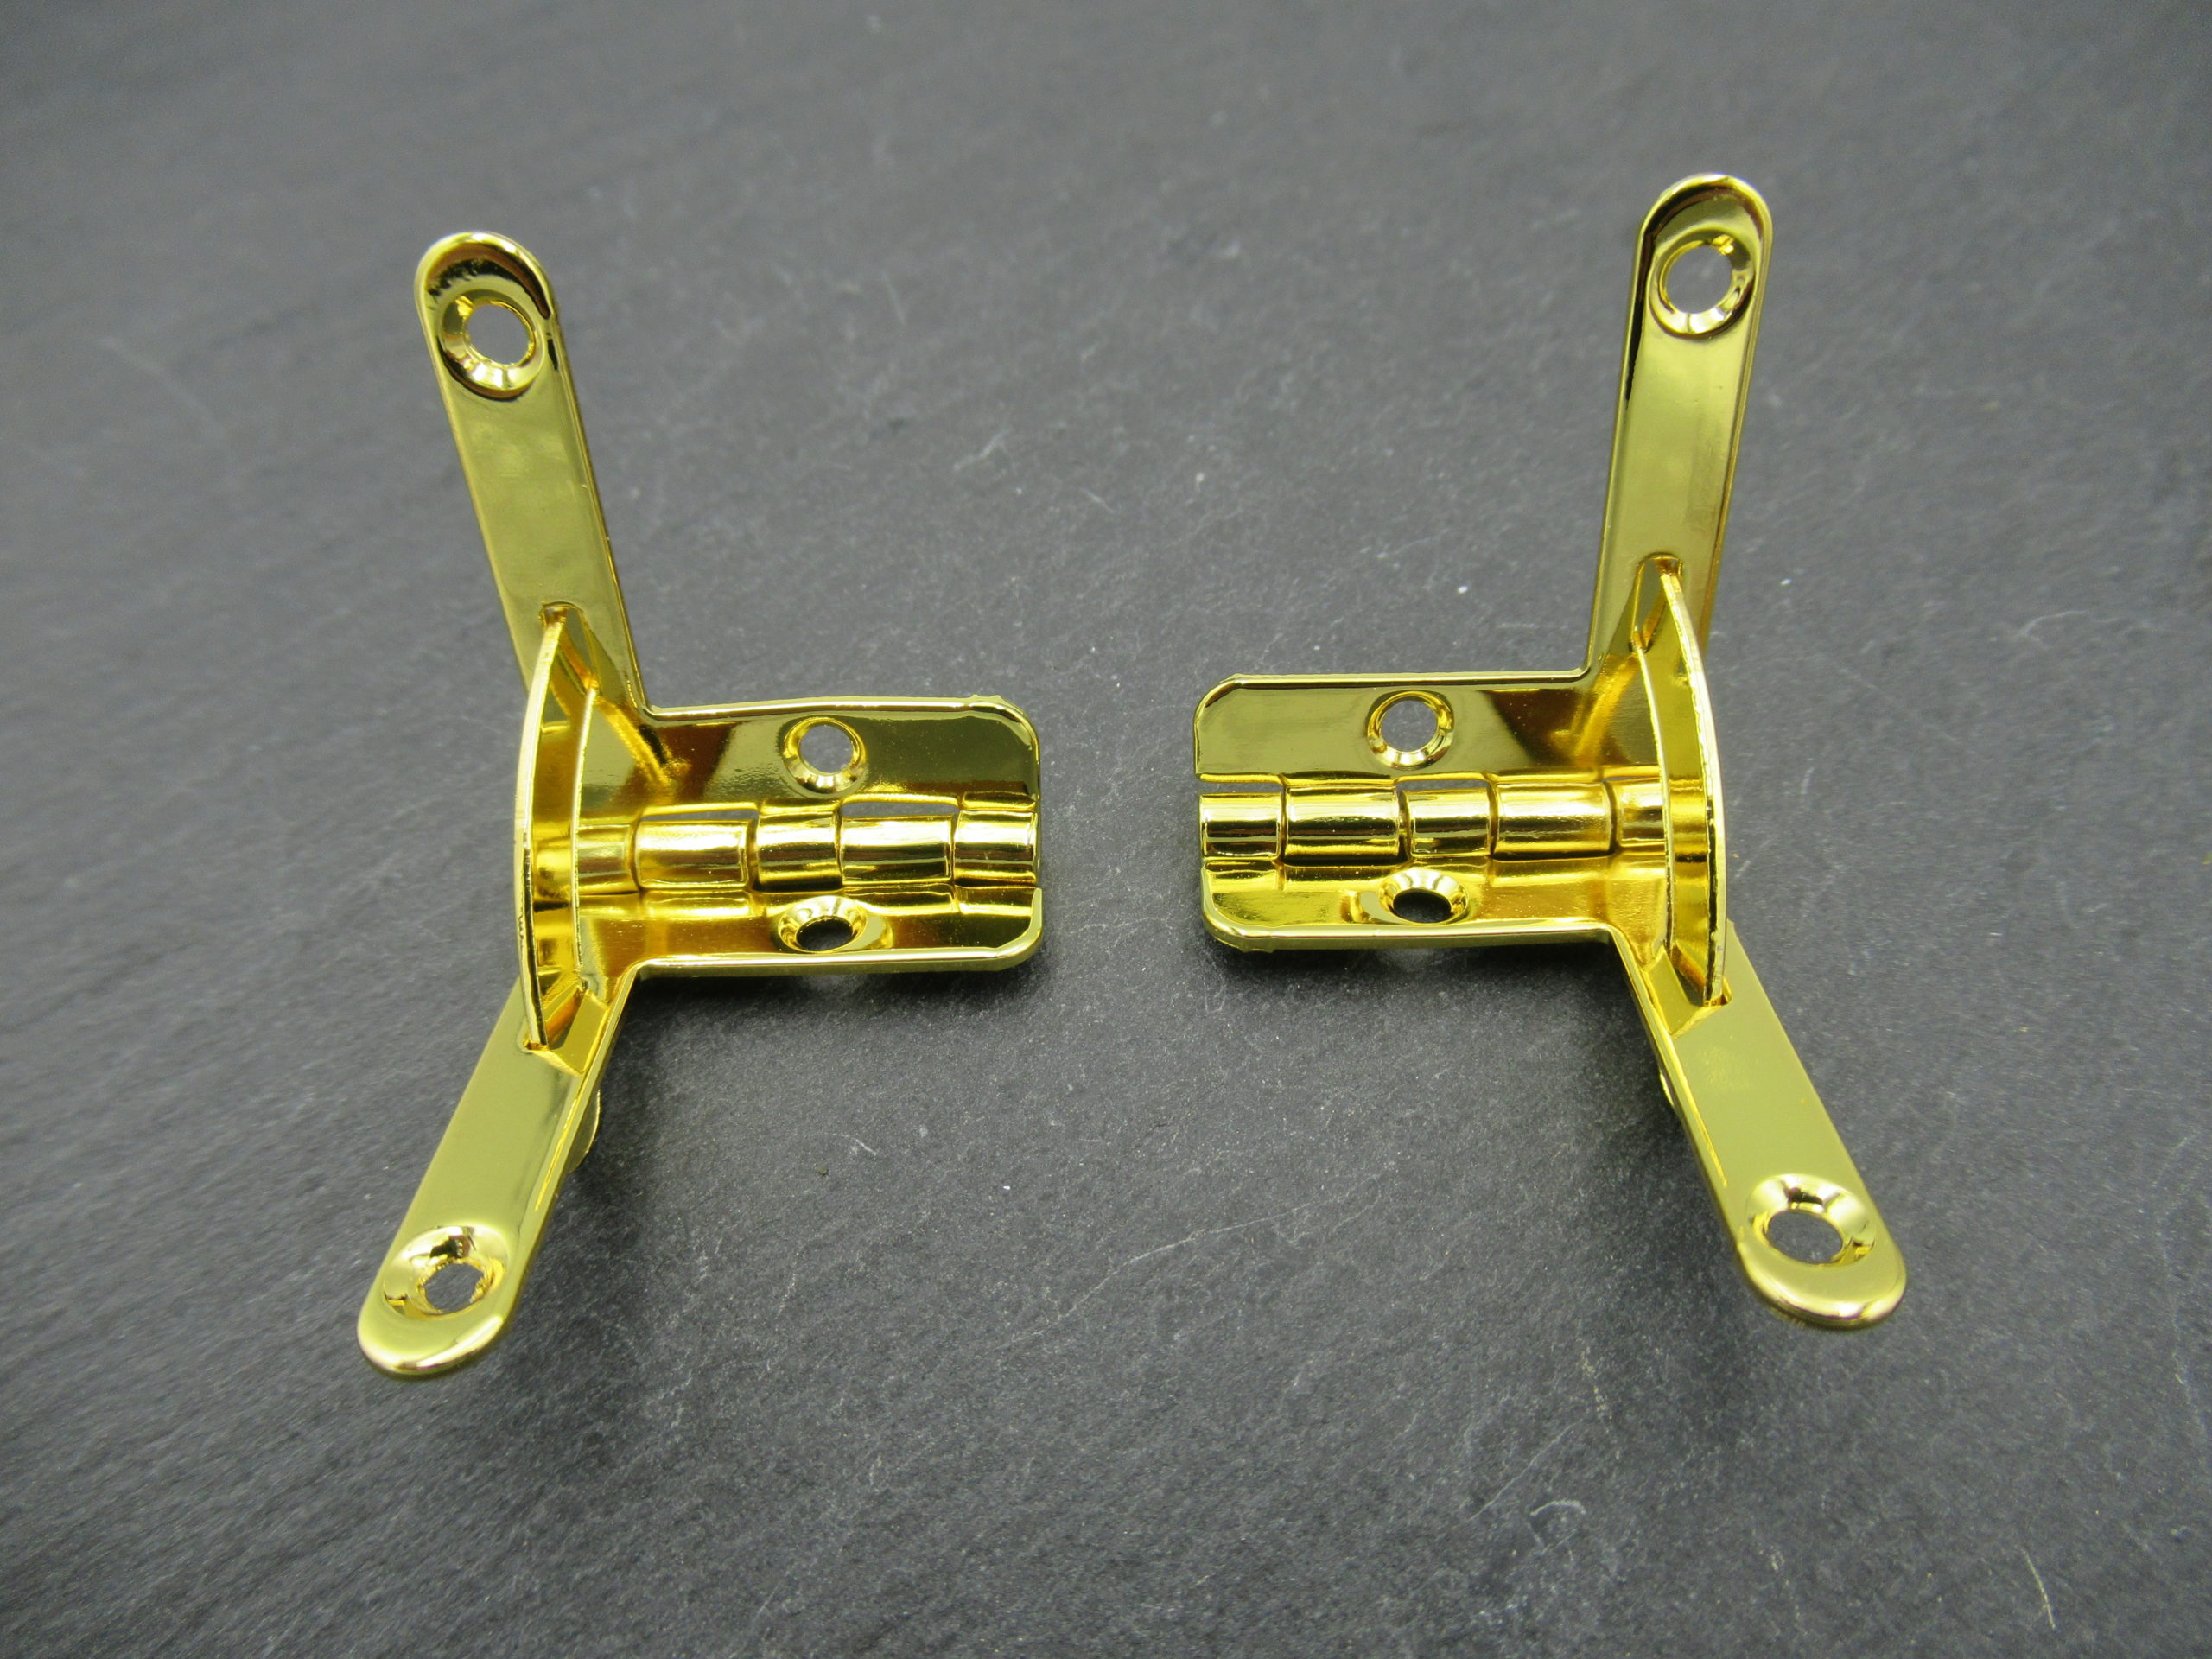 Pair of Quadrant Hinges for boxes Brass plated 30mm L X 5 mm W X